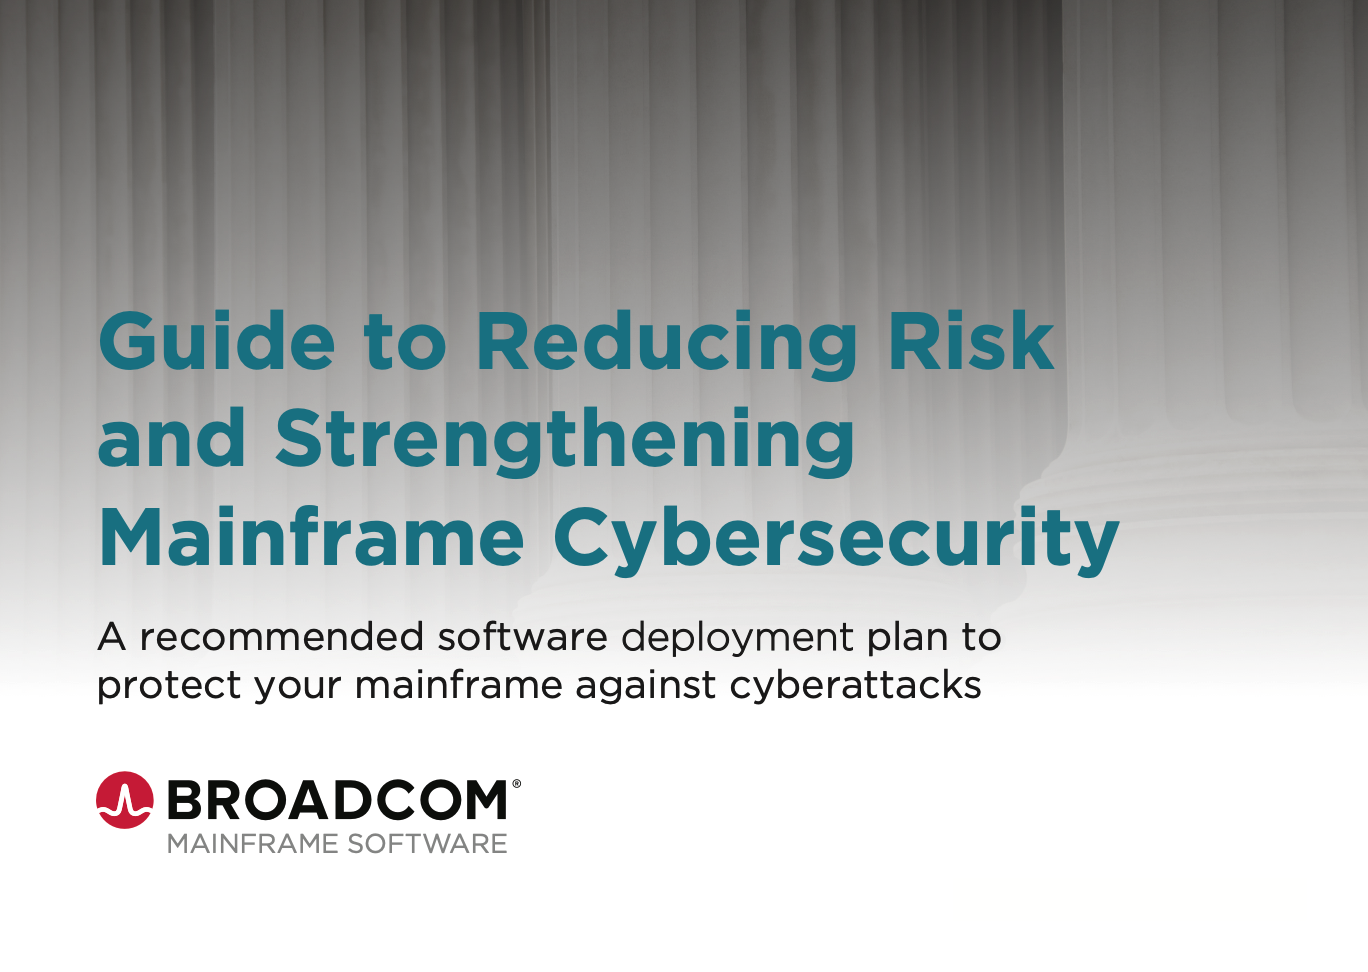 MSD_SEC_Guide to Reducing Risk and Strengthening Mainframe Cybersecurity Thumbnail Sightly Smaller